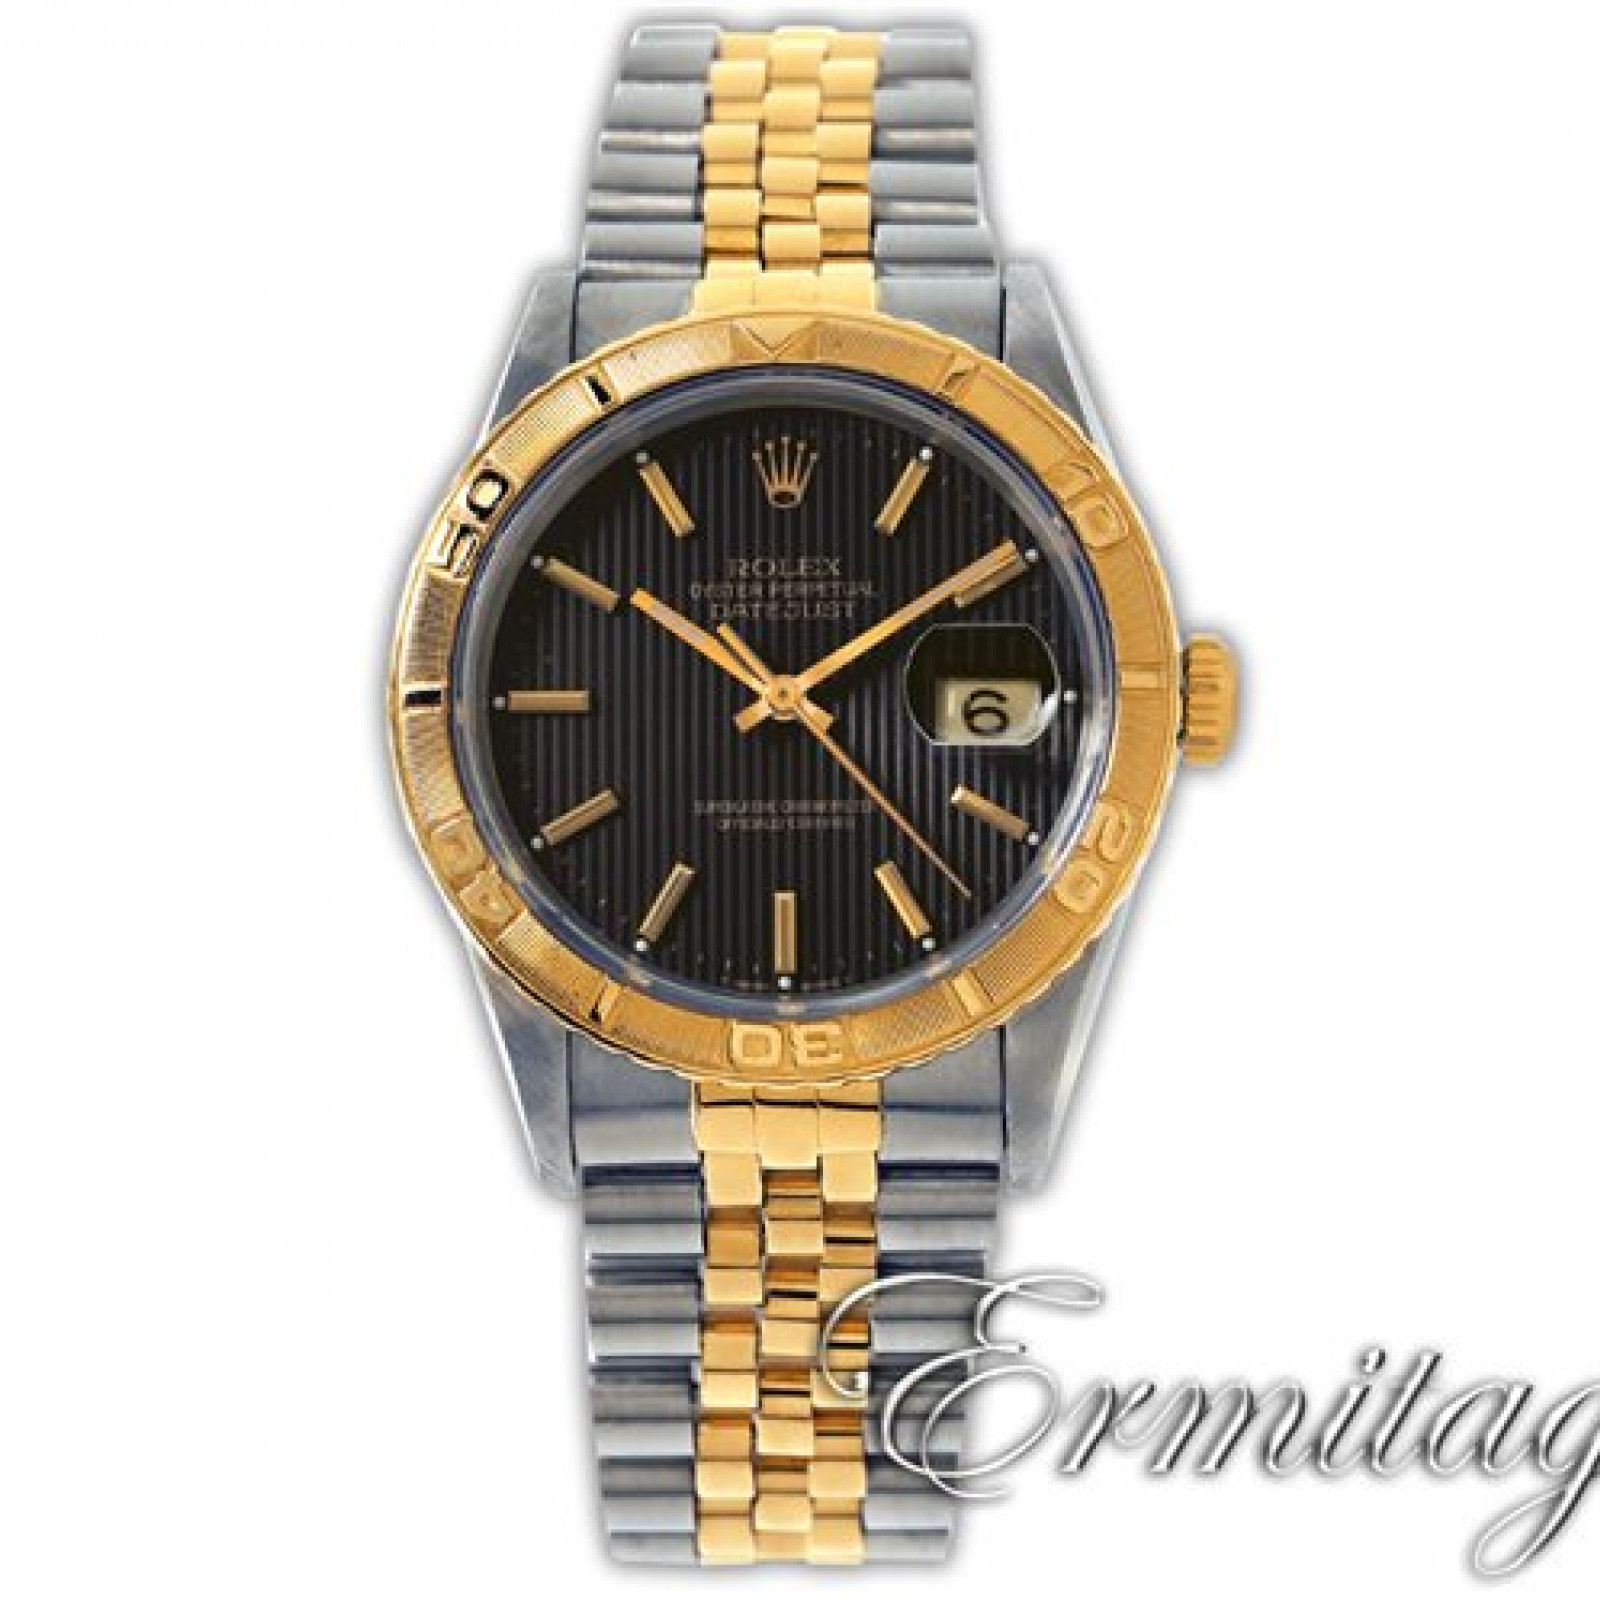 Rolex Oyster Perpetual Datejust Turn-O-Graph 16263